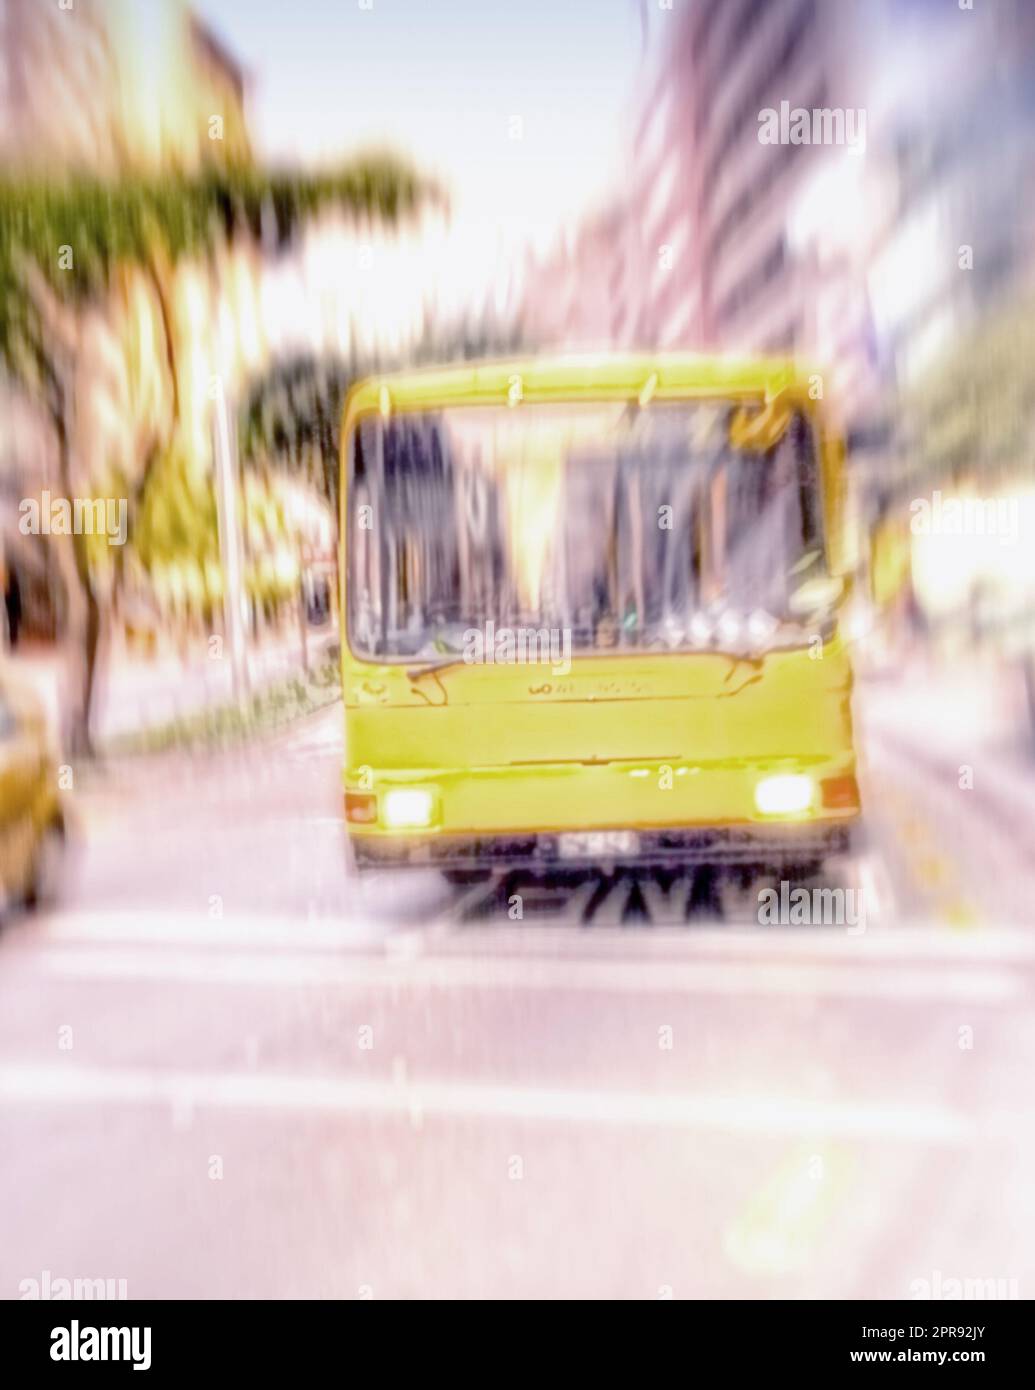 A yellow bus driving and traveling through a bust scene in the city. Commuting through a busy urban town, using public transport to travel the roads and streets to get to a destination Stock Photo